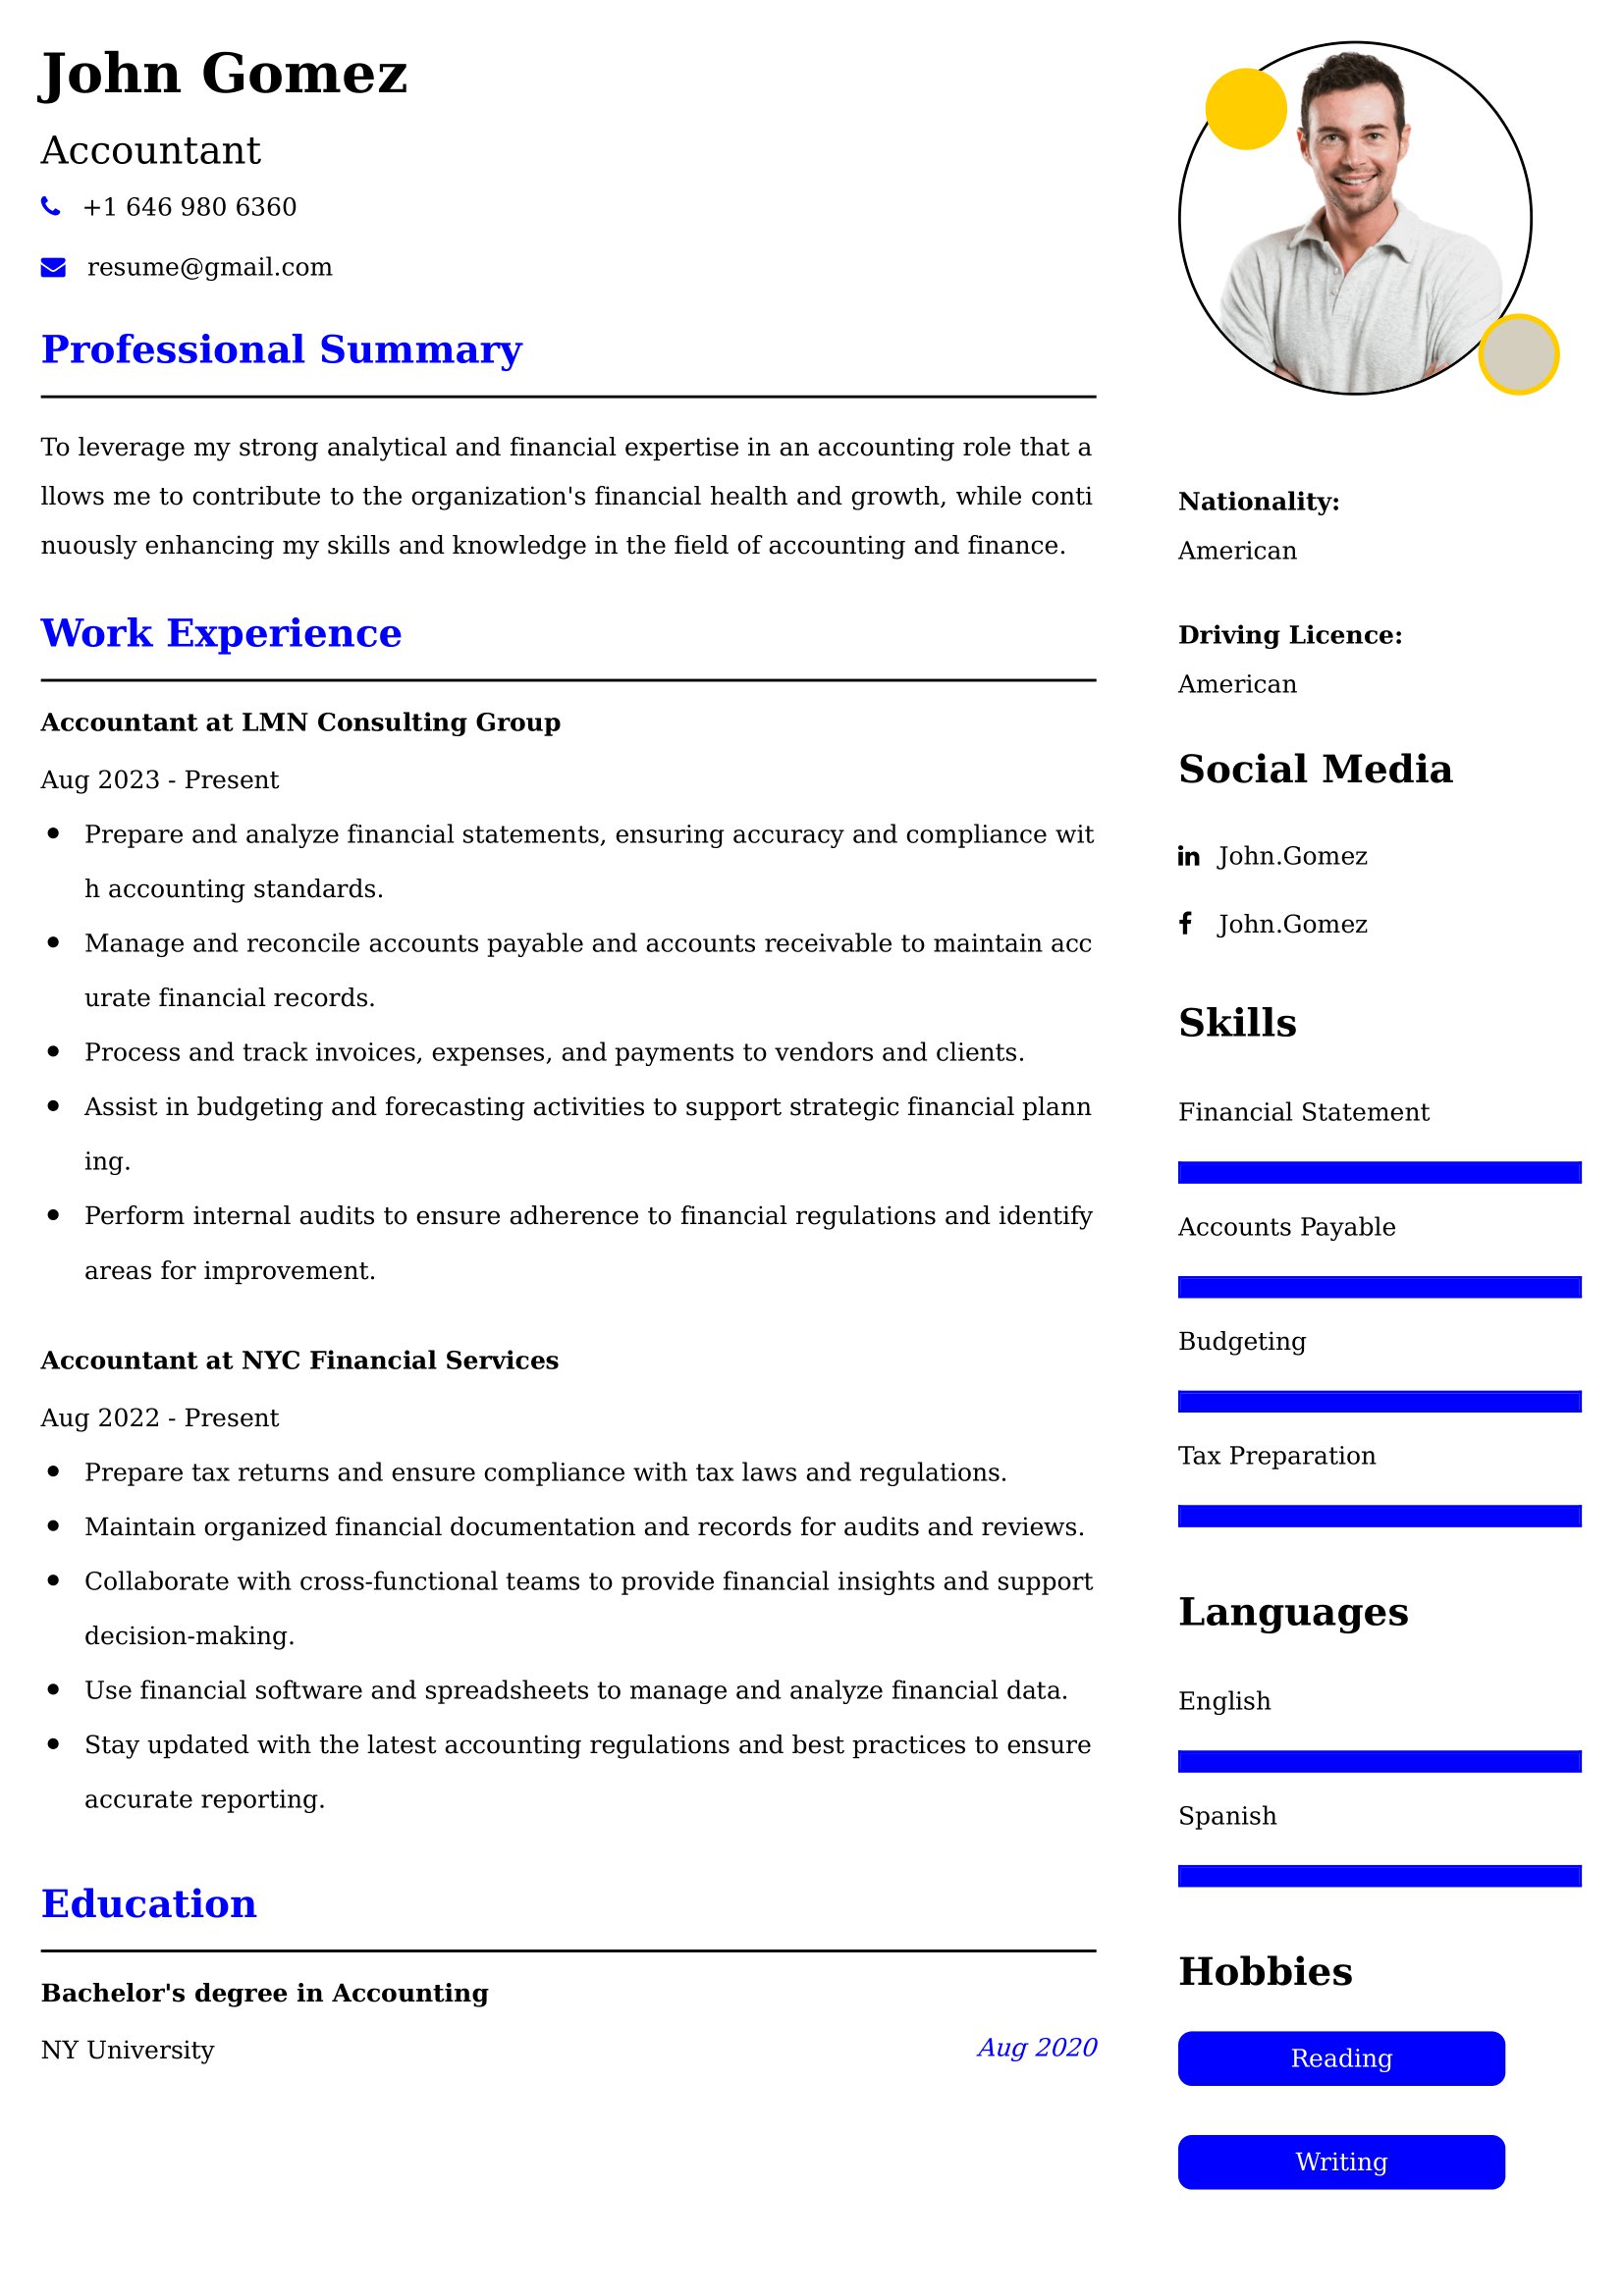 Accountant Resume Examples - Australian Format and Tips